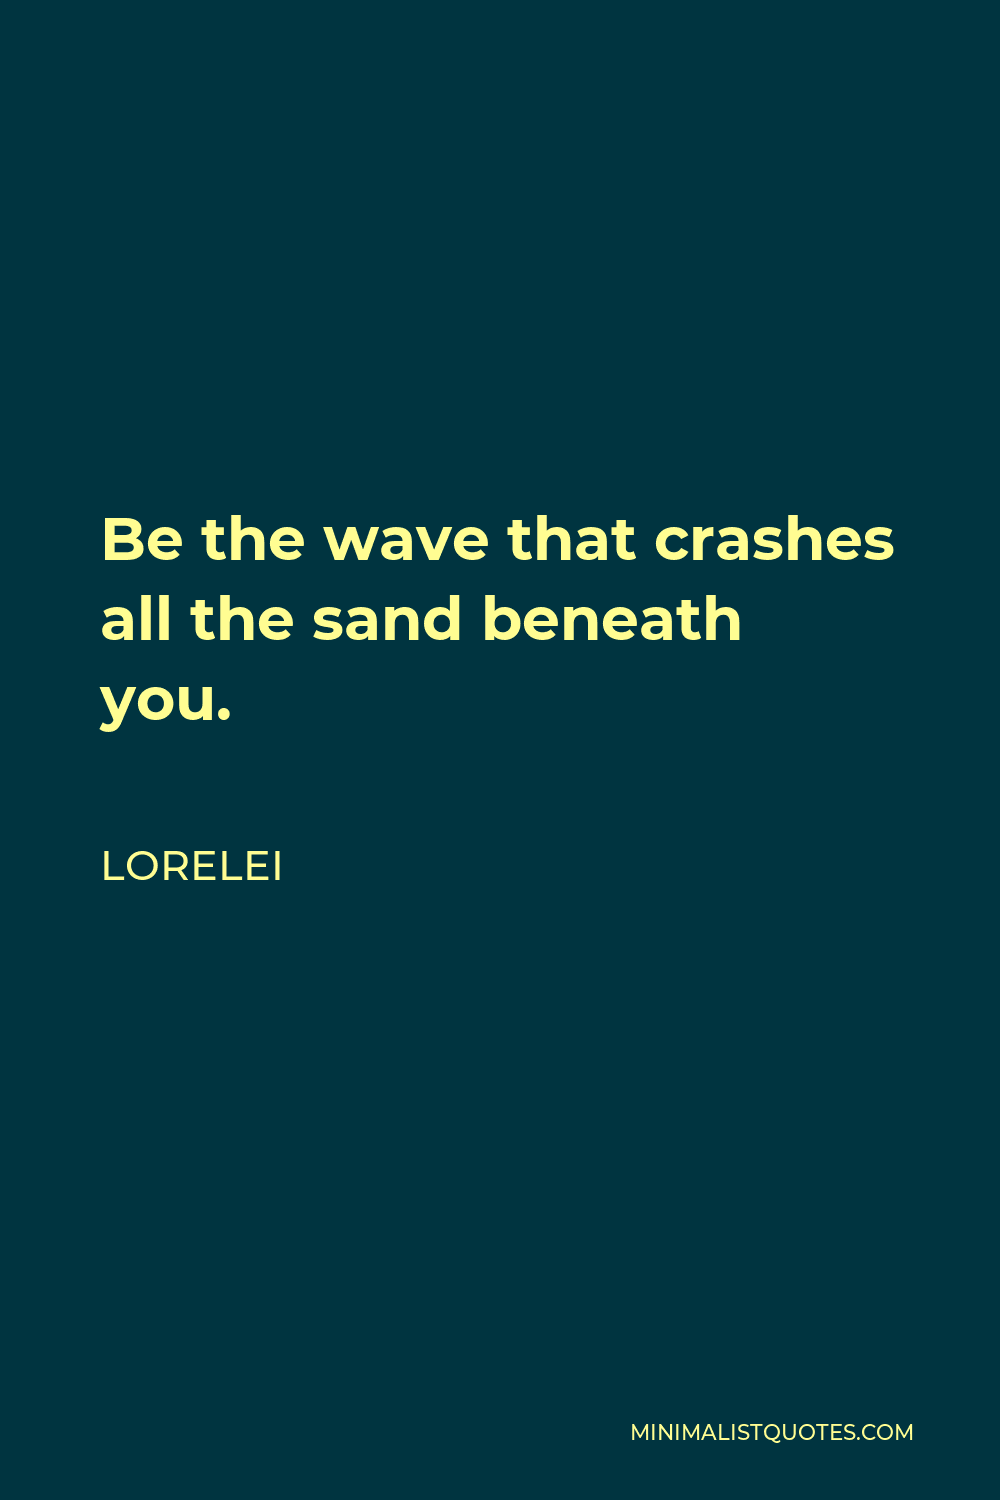 Lorelei Quote - Be the wave that crashes all the sand beneath you.